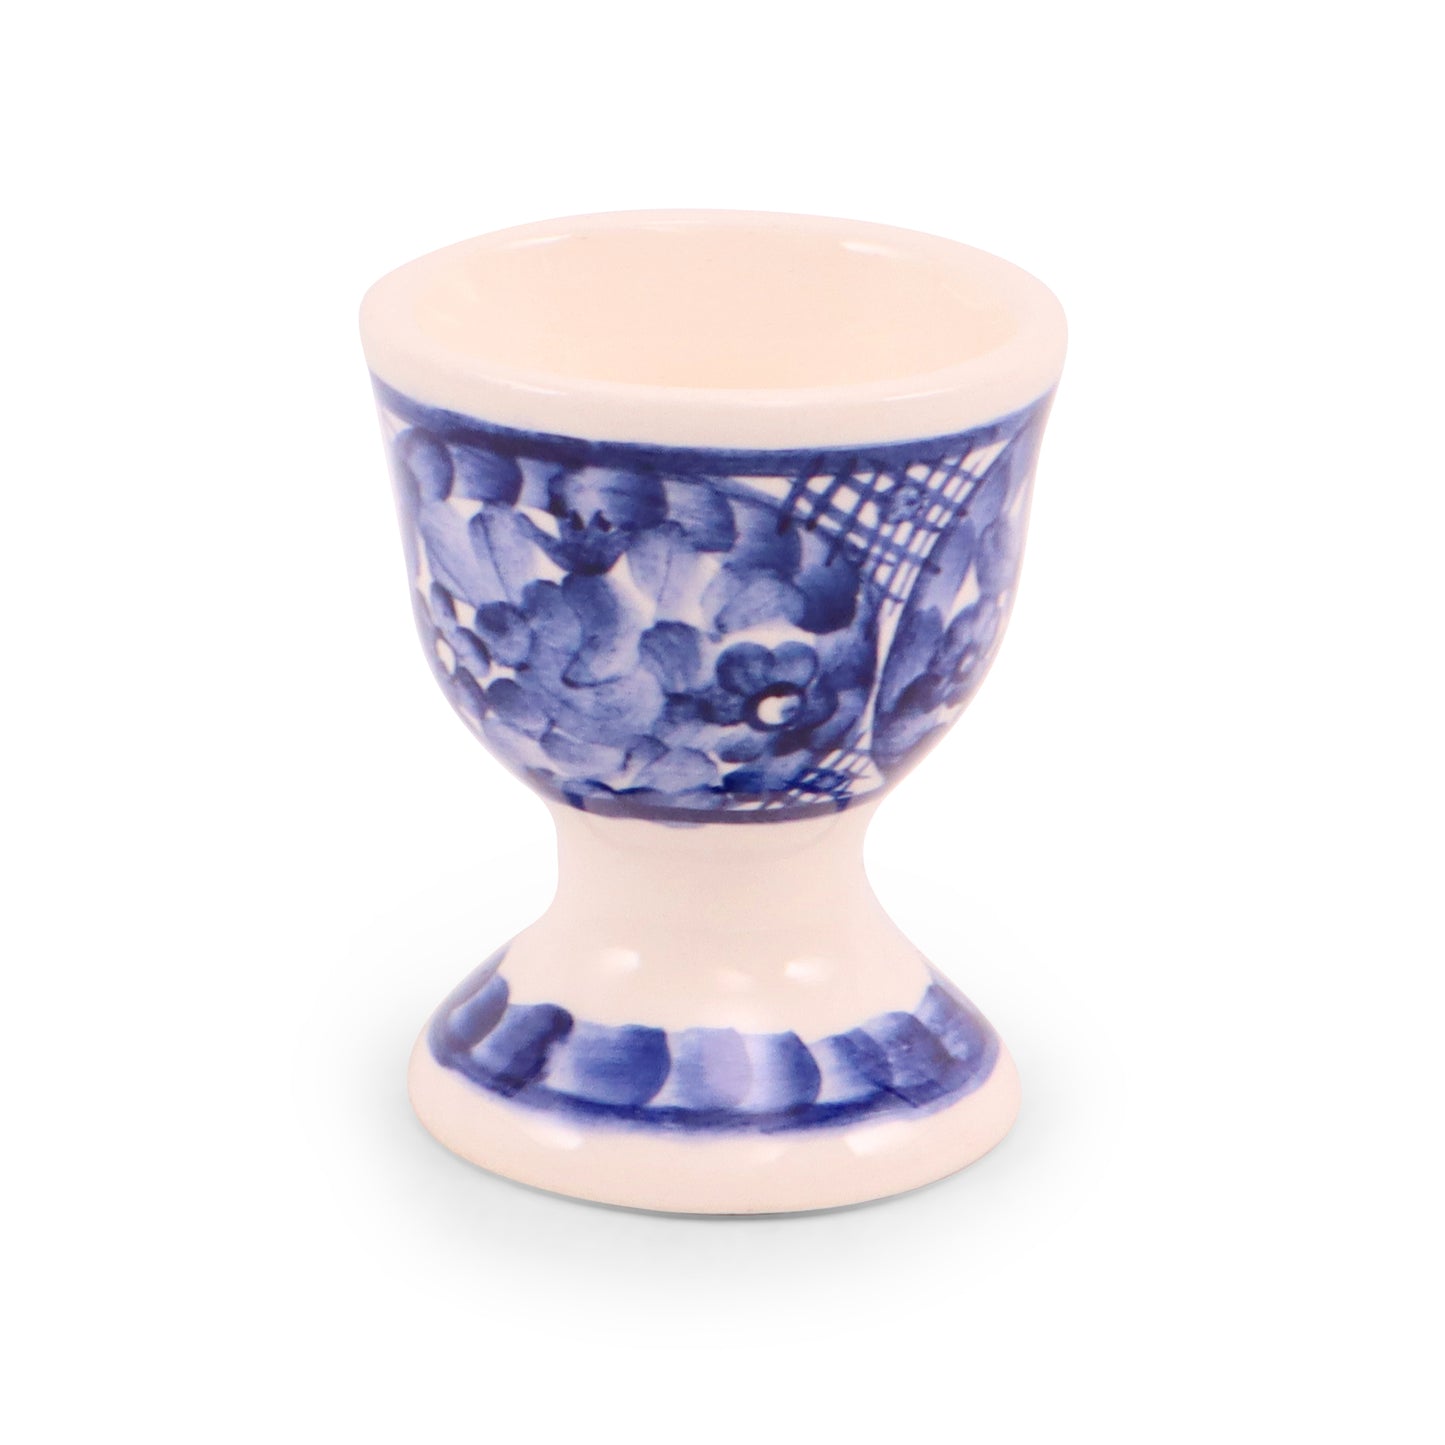 2"x2.5" Egg Cup. Pattern: Heritage